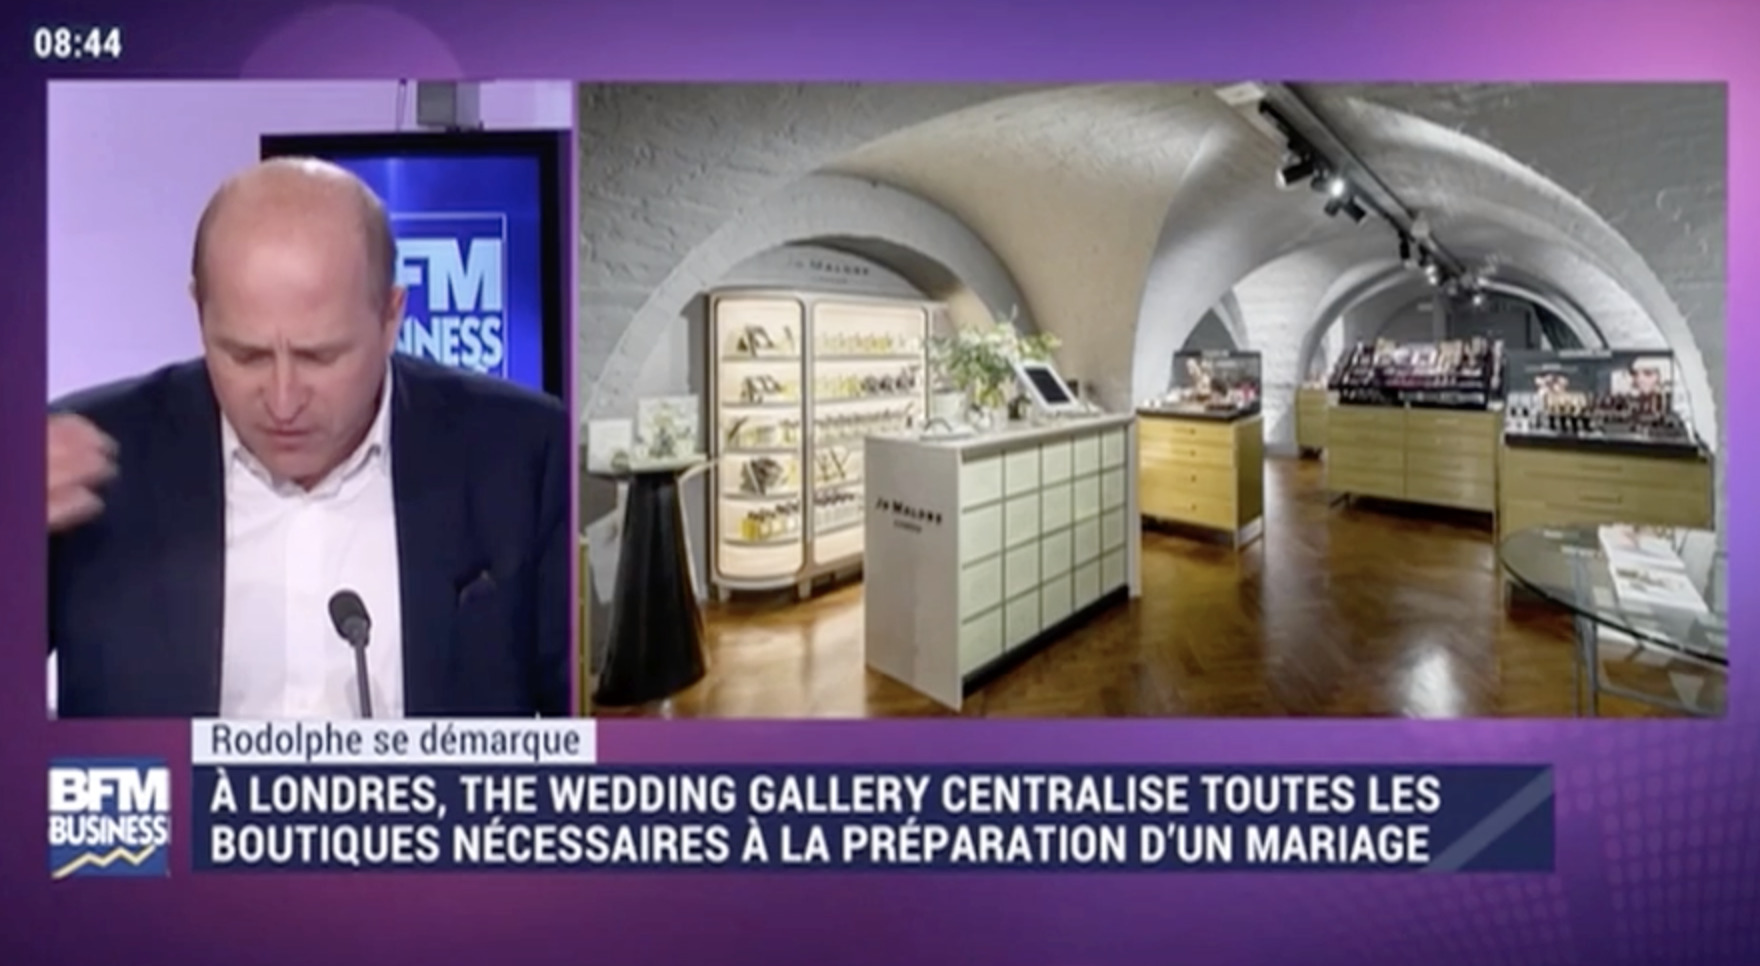 THE WEDDING GALLERY / INNOVER POUR LE COMMERCE